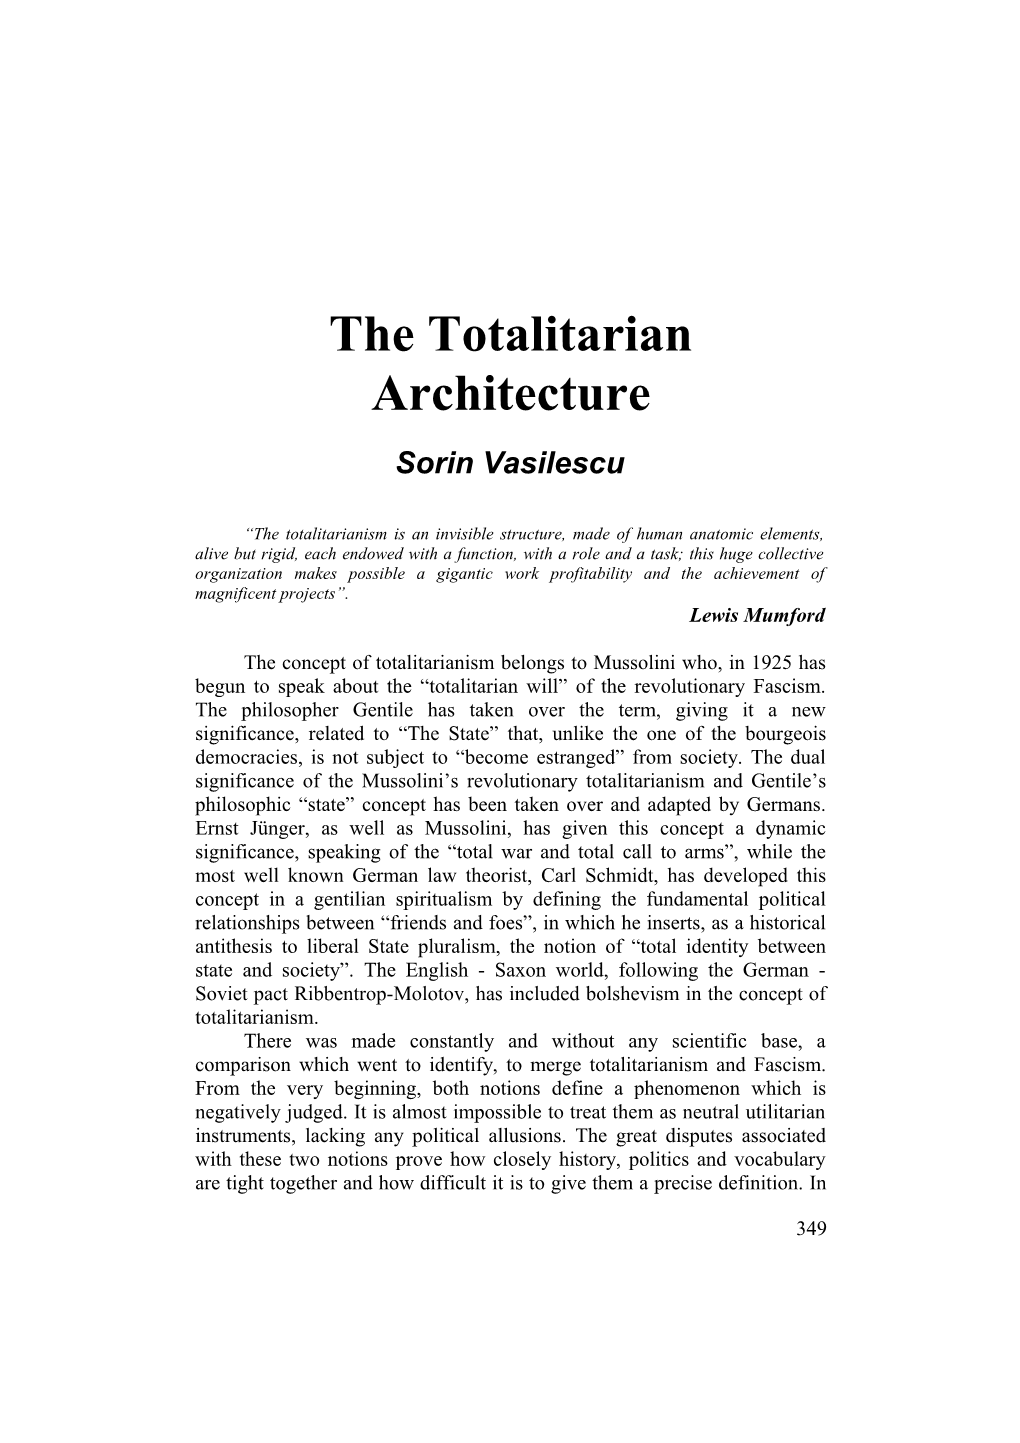 The Totalitarian Architecture